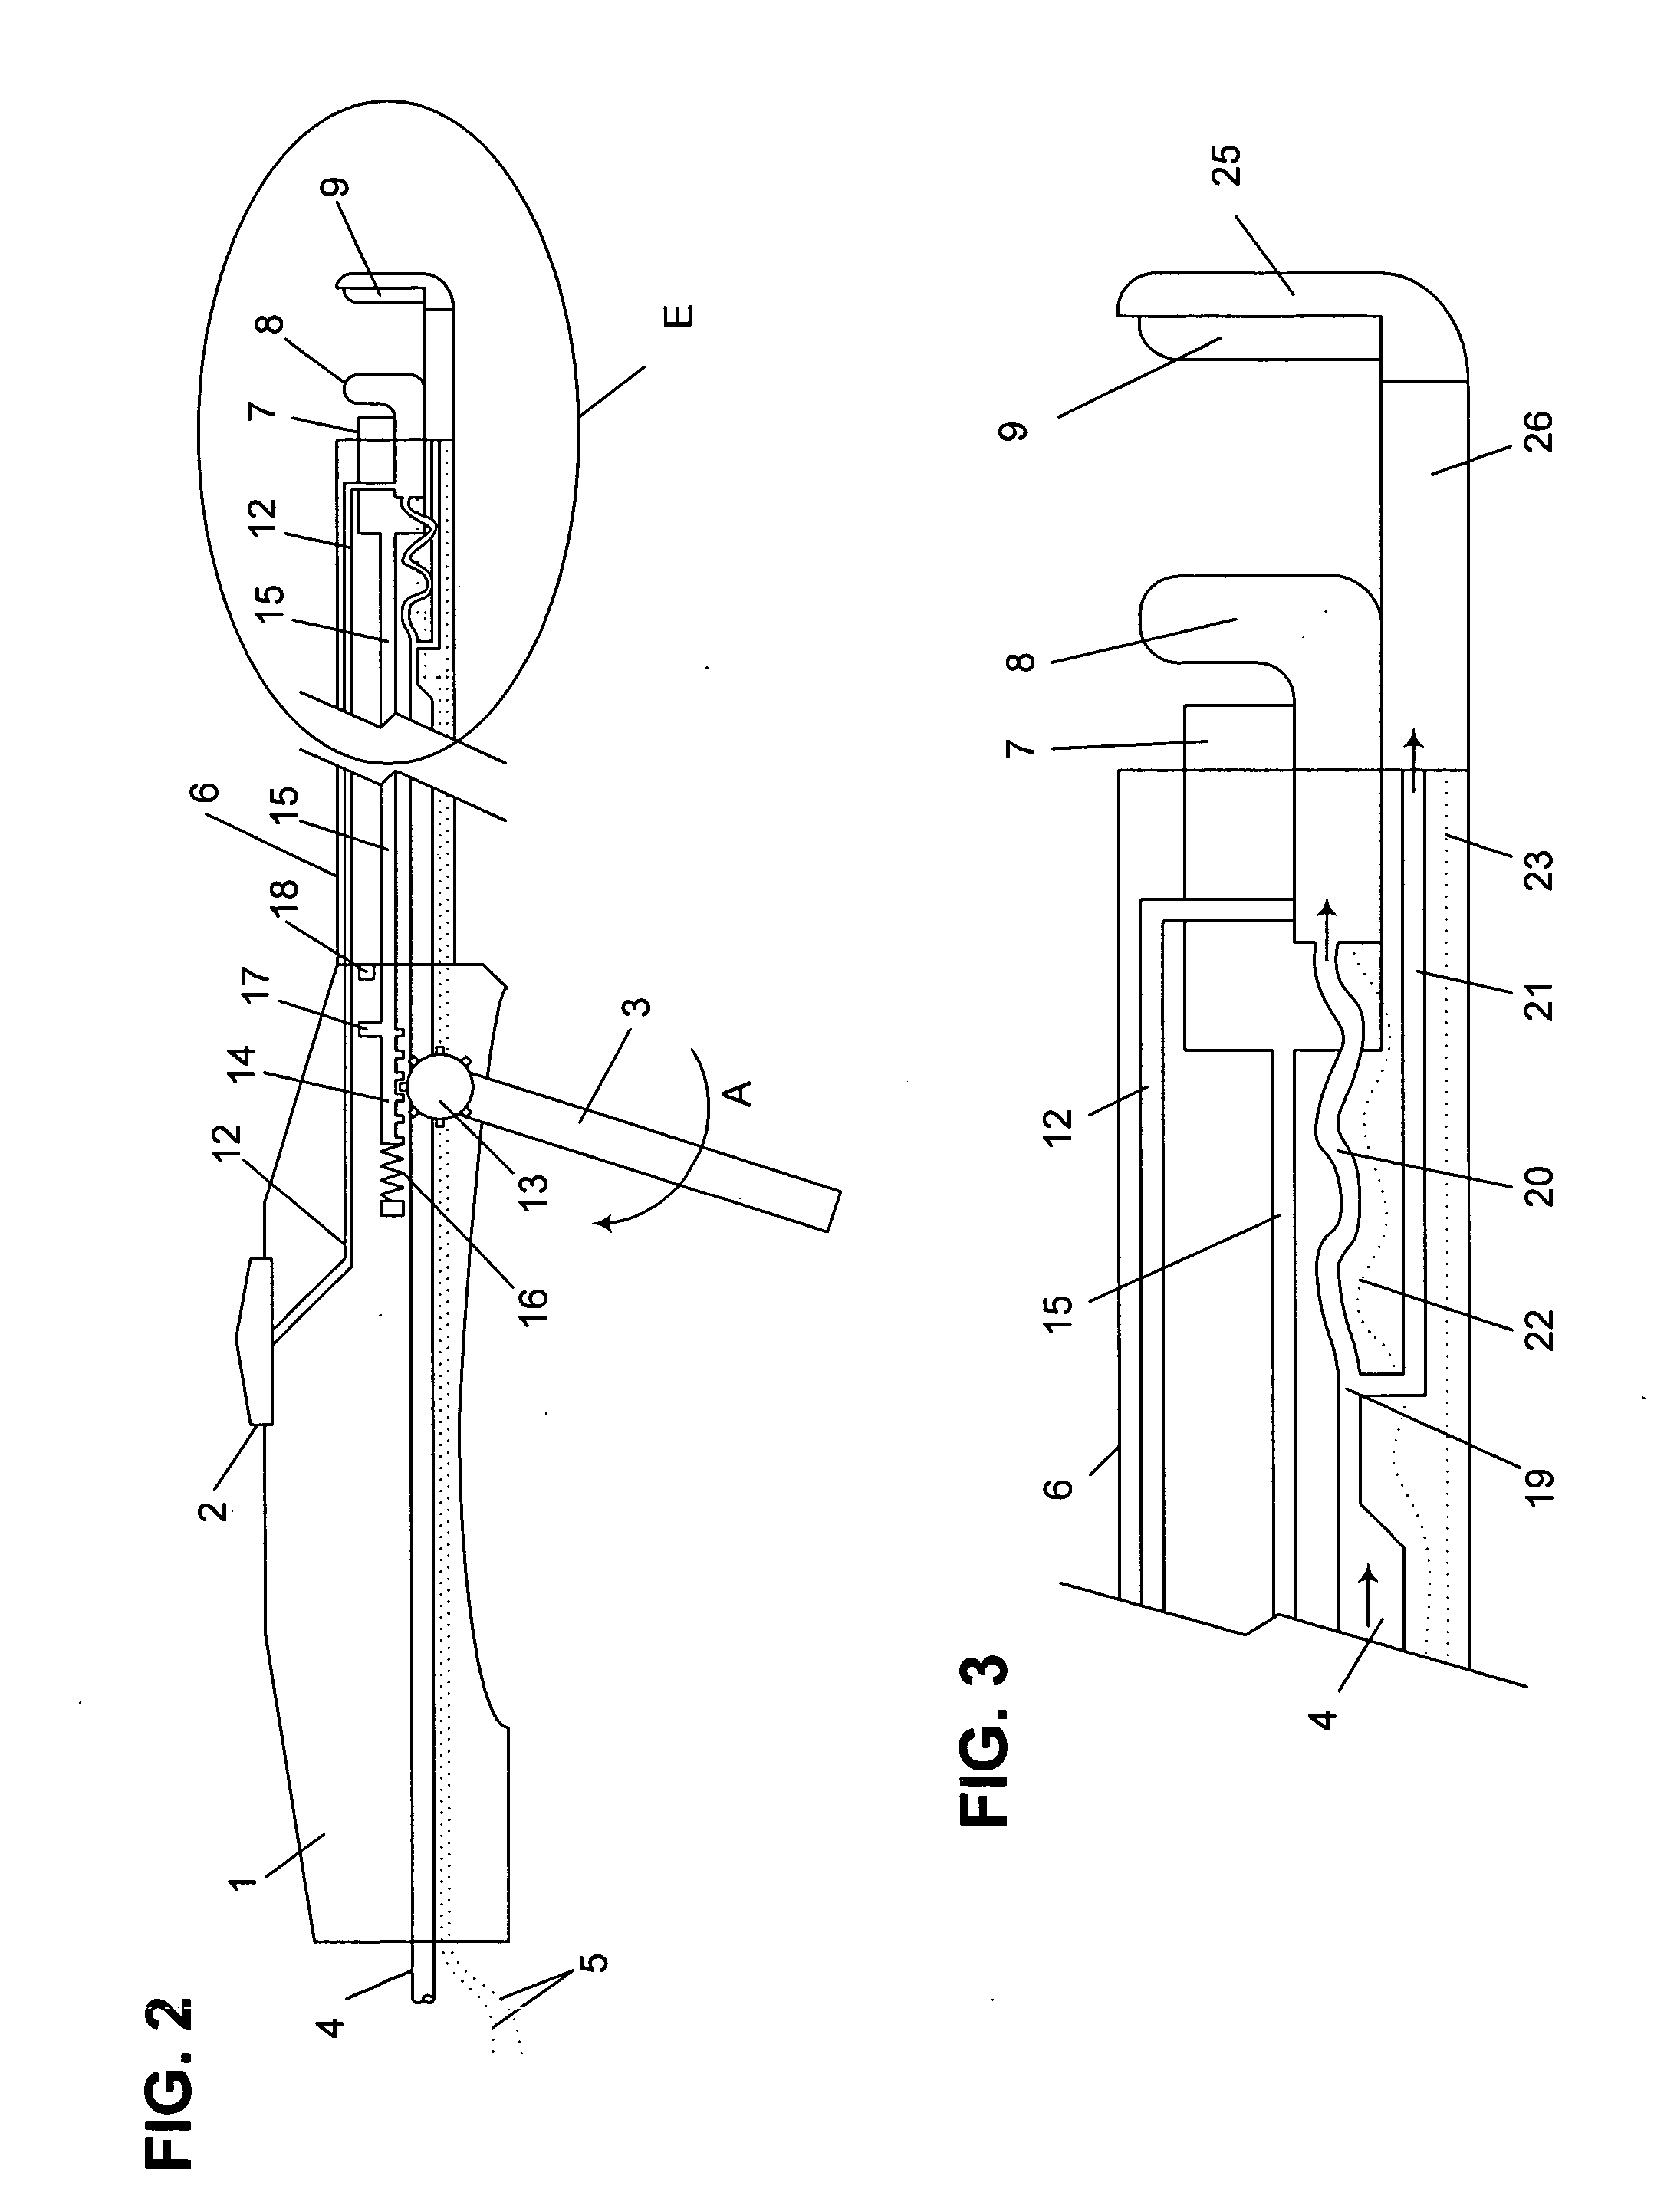 Fluid-assisted medical device